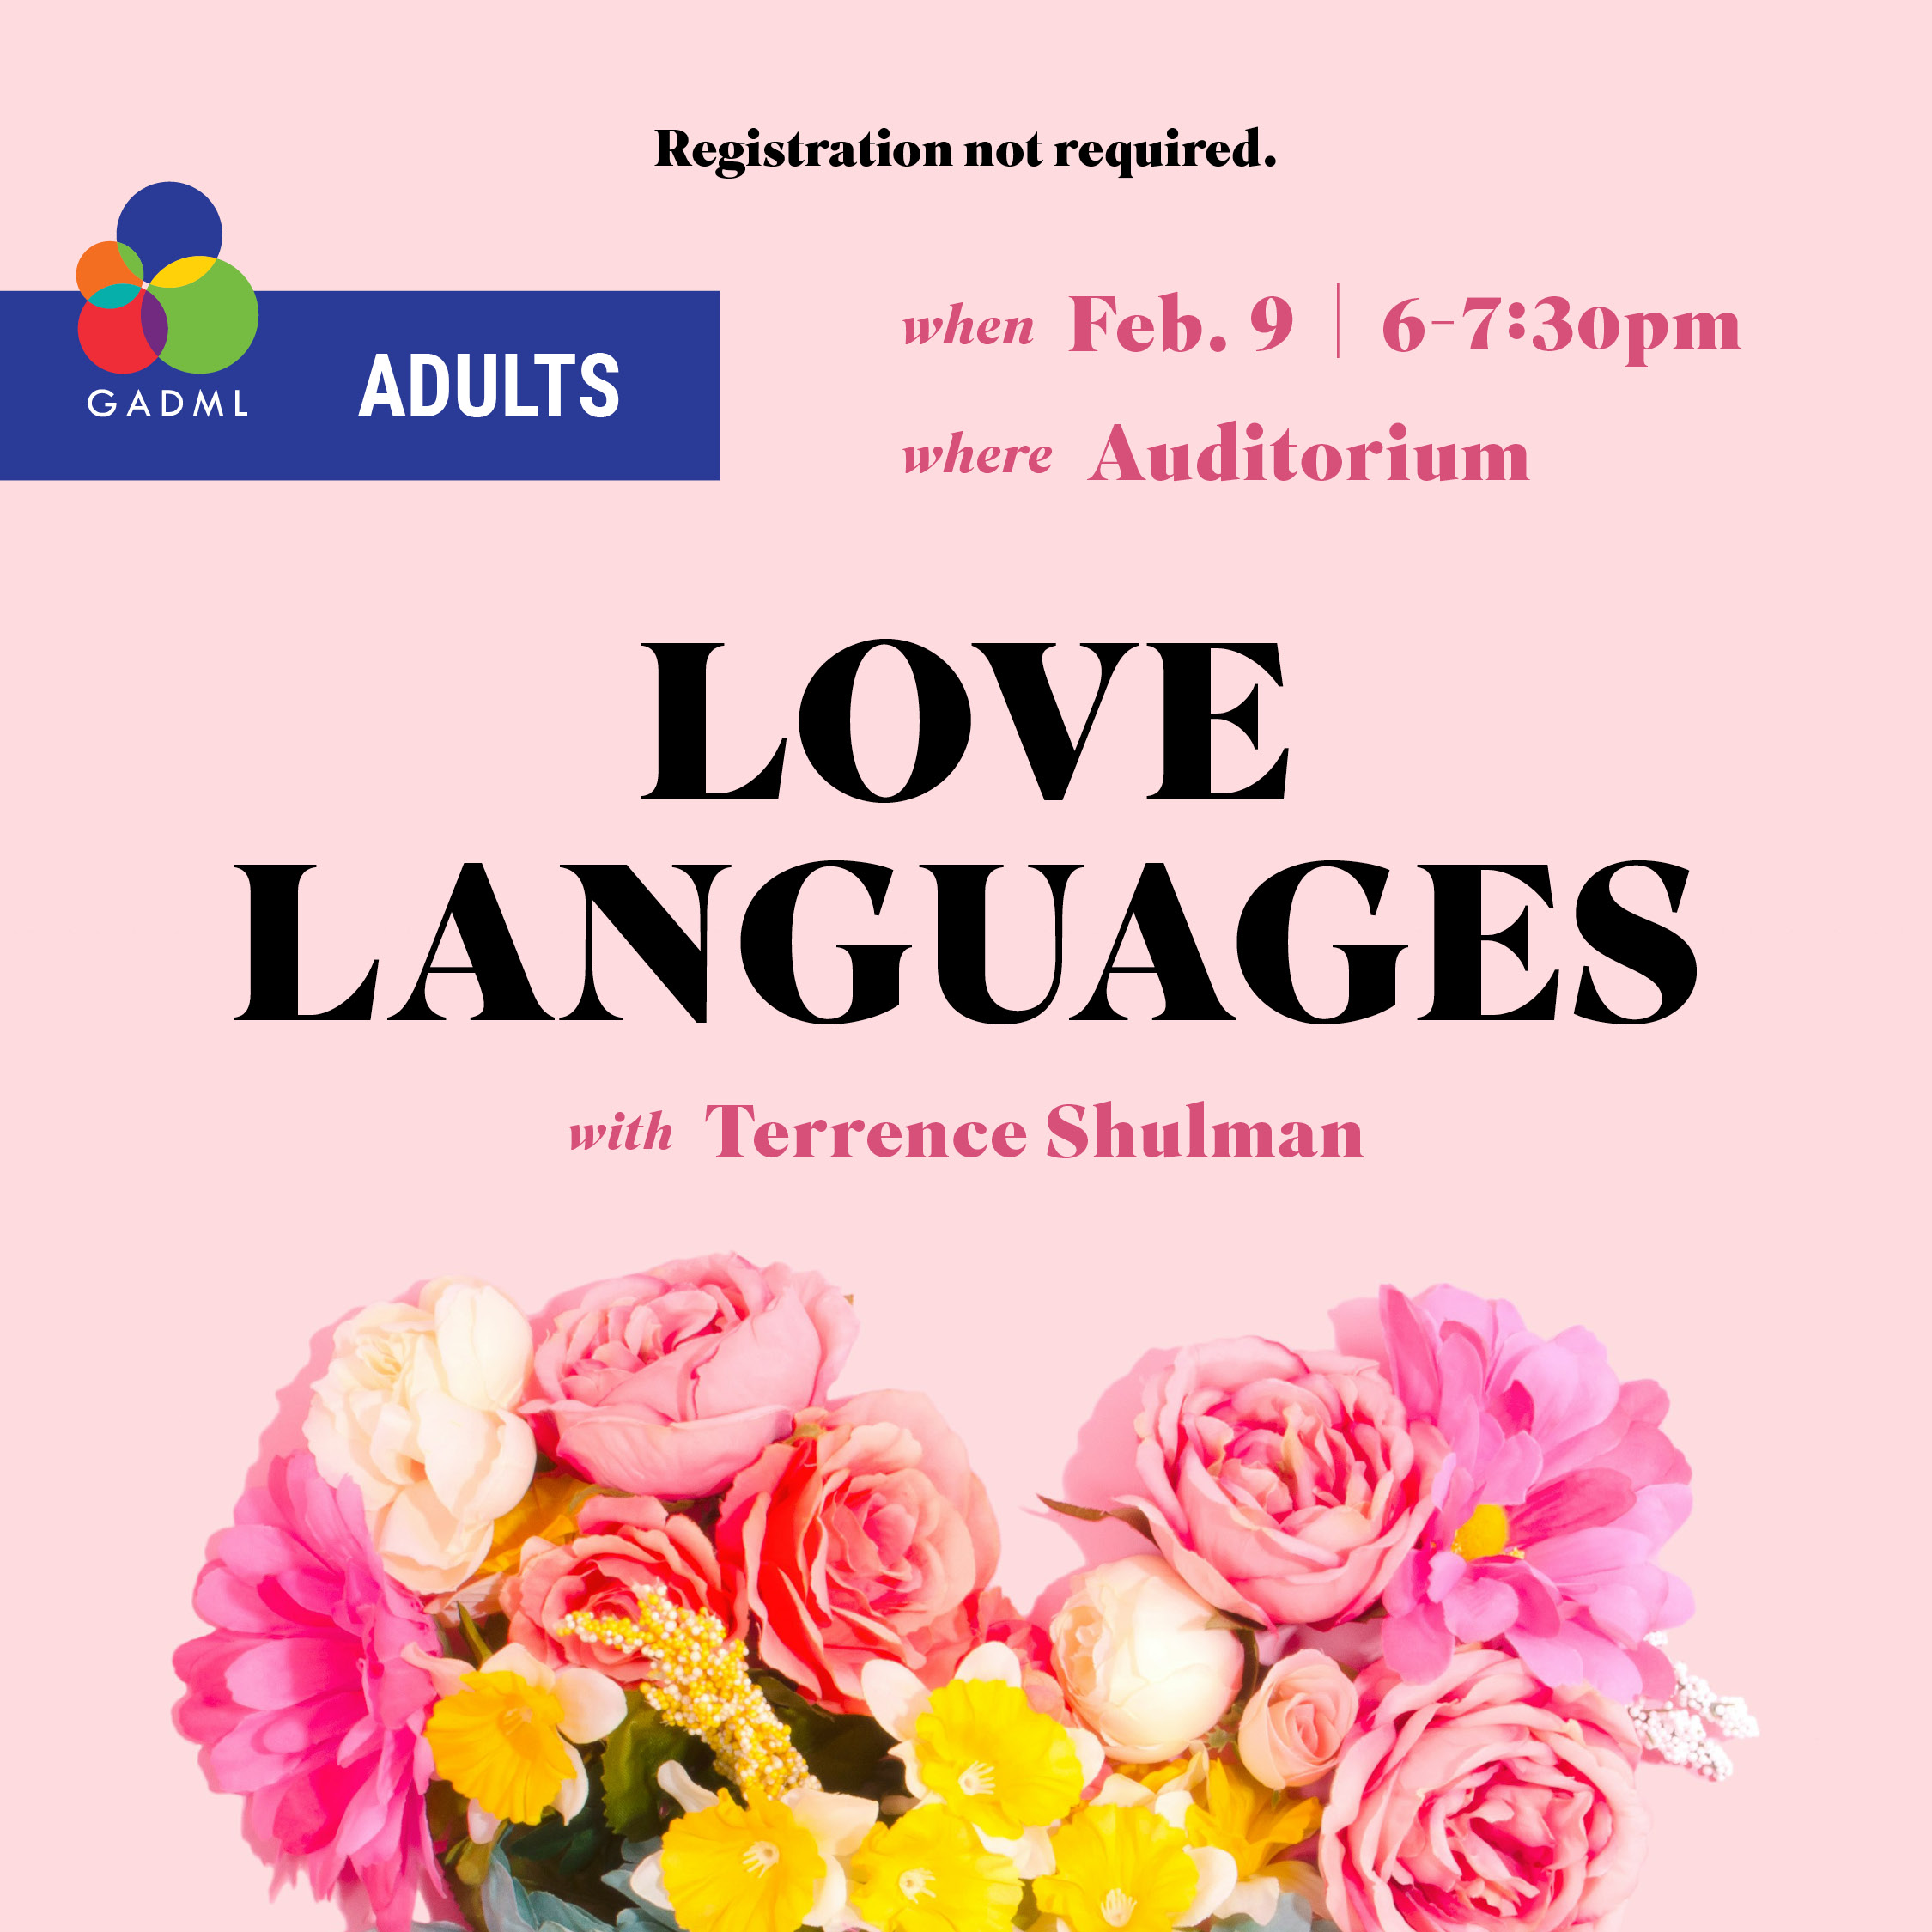 Love Languages Lecture with Terrence Shulman, February 9, 6pm, Library Auditorium